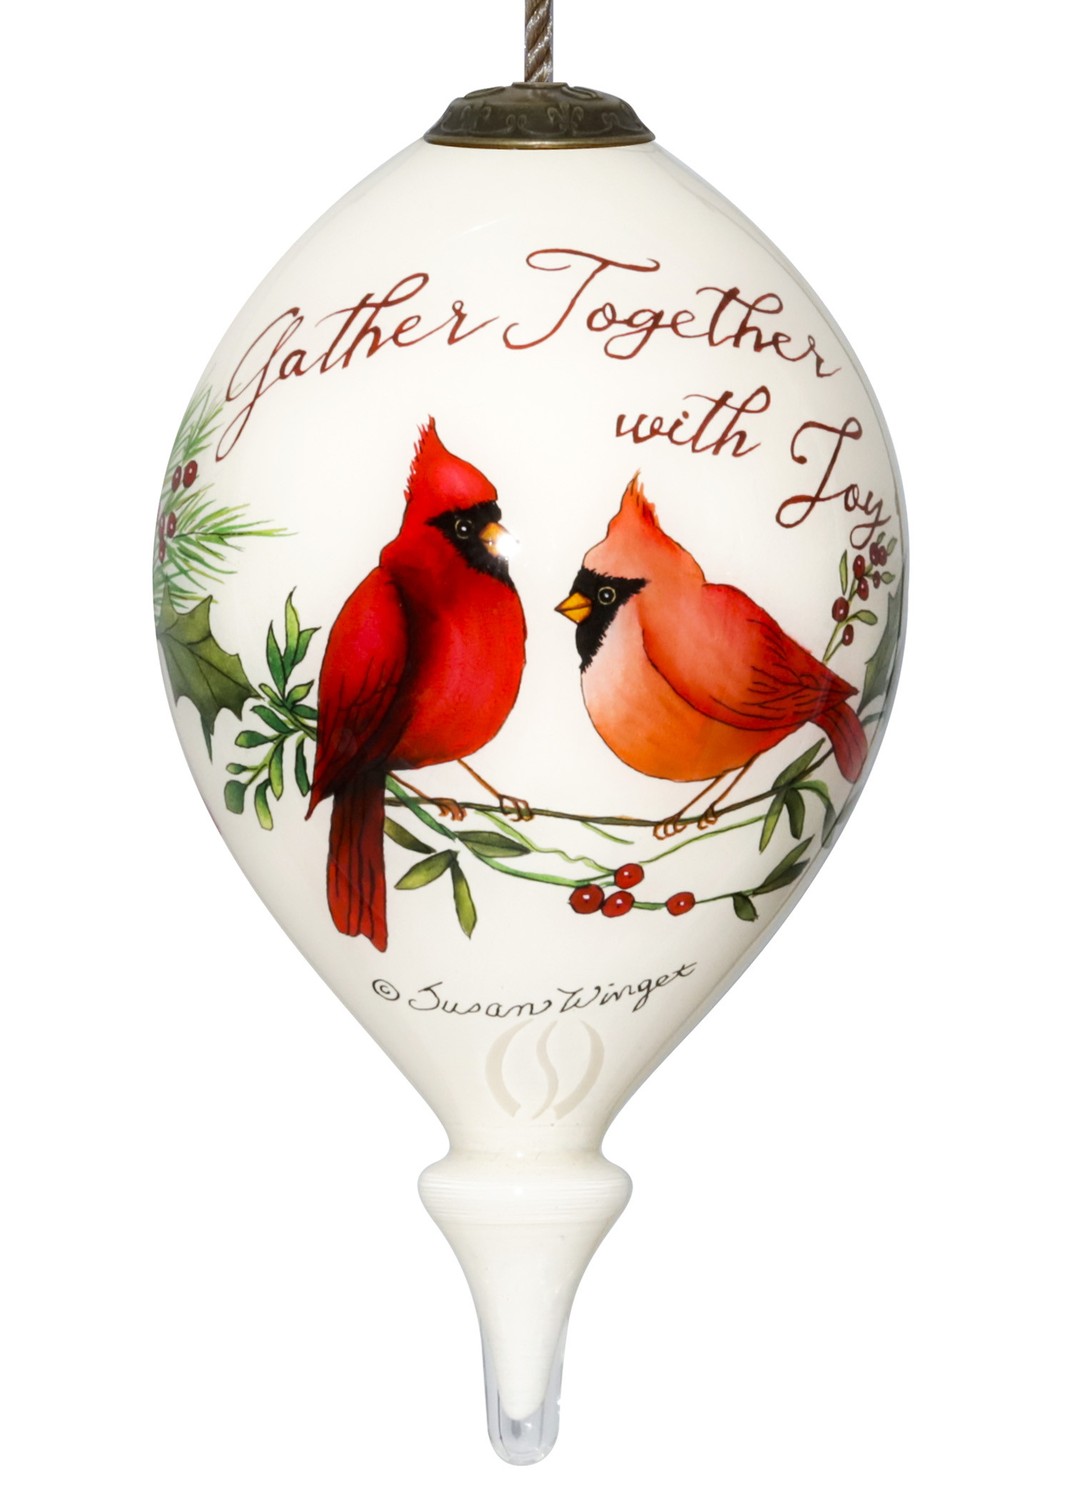 Gather Together With Joy Cardinals Hand Painted Mouth Blown Glass Ornament